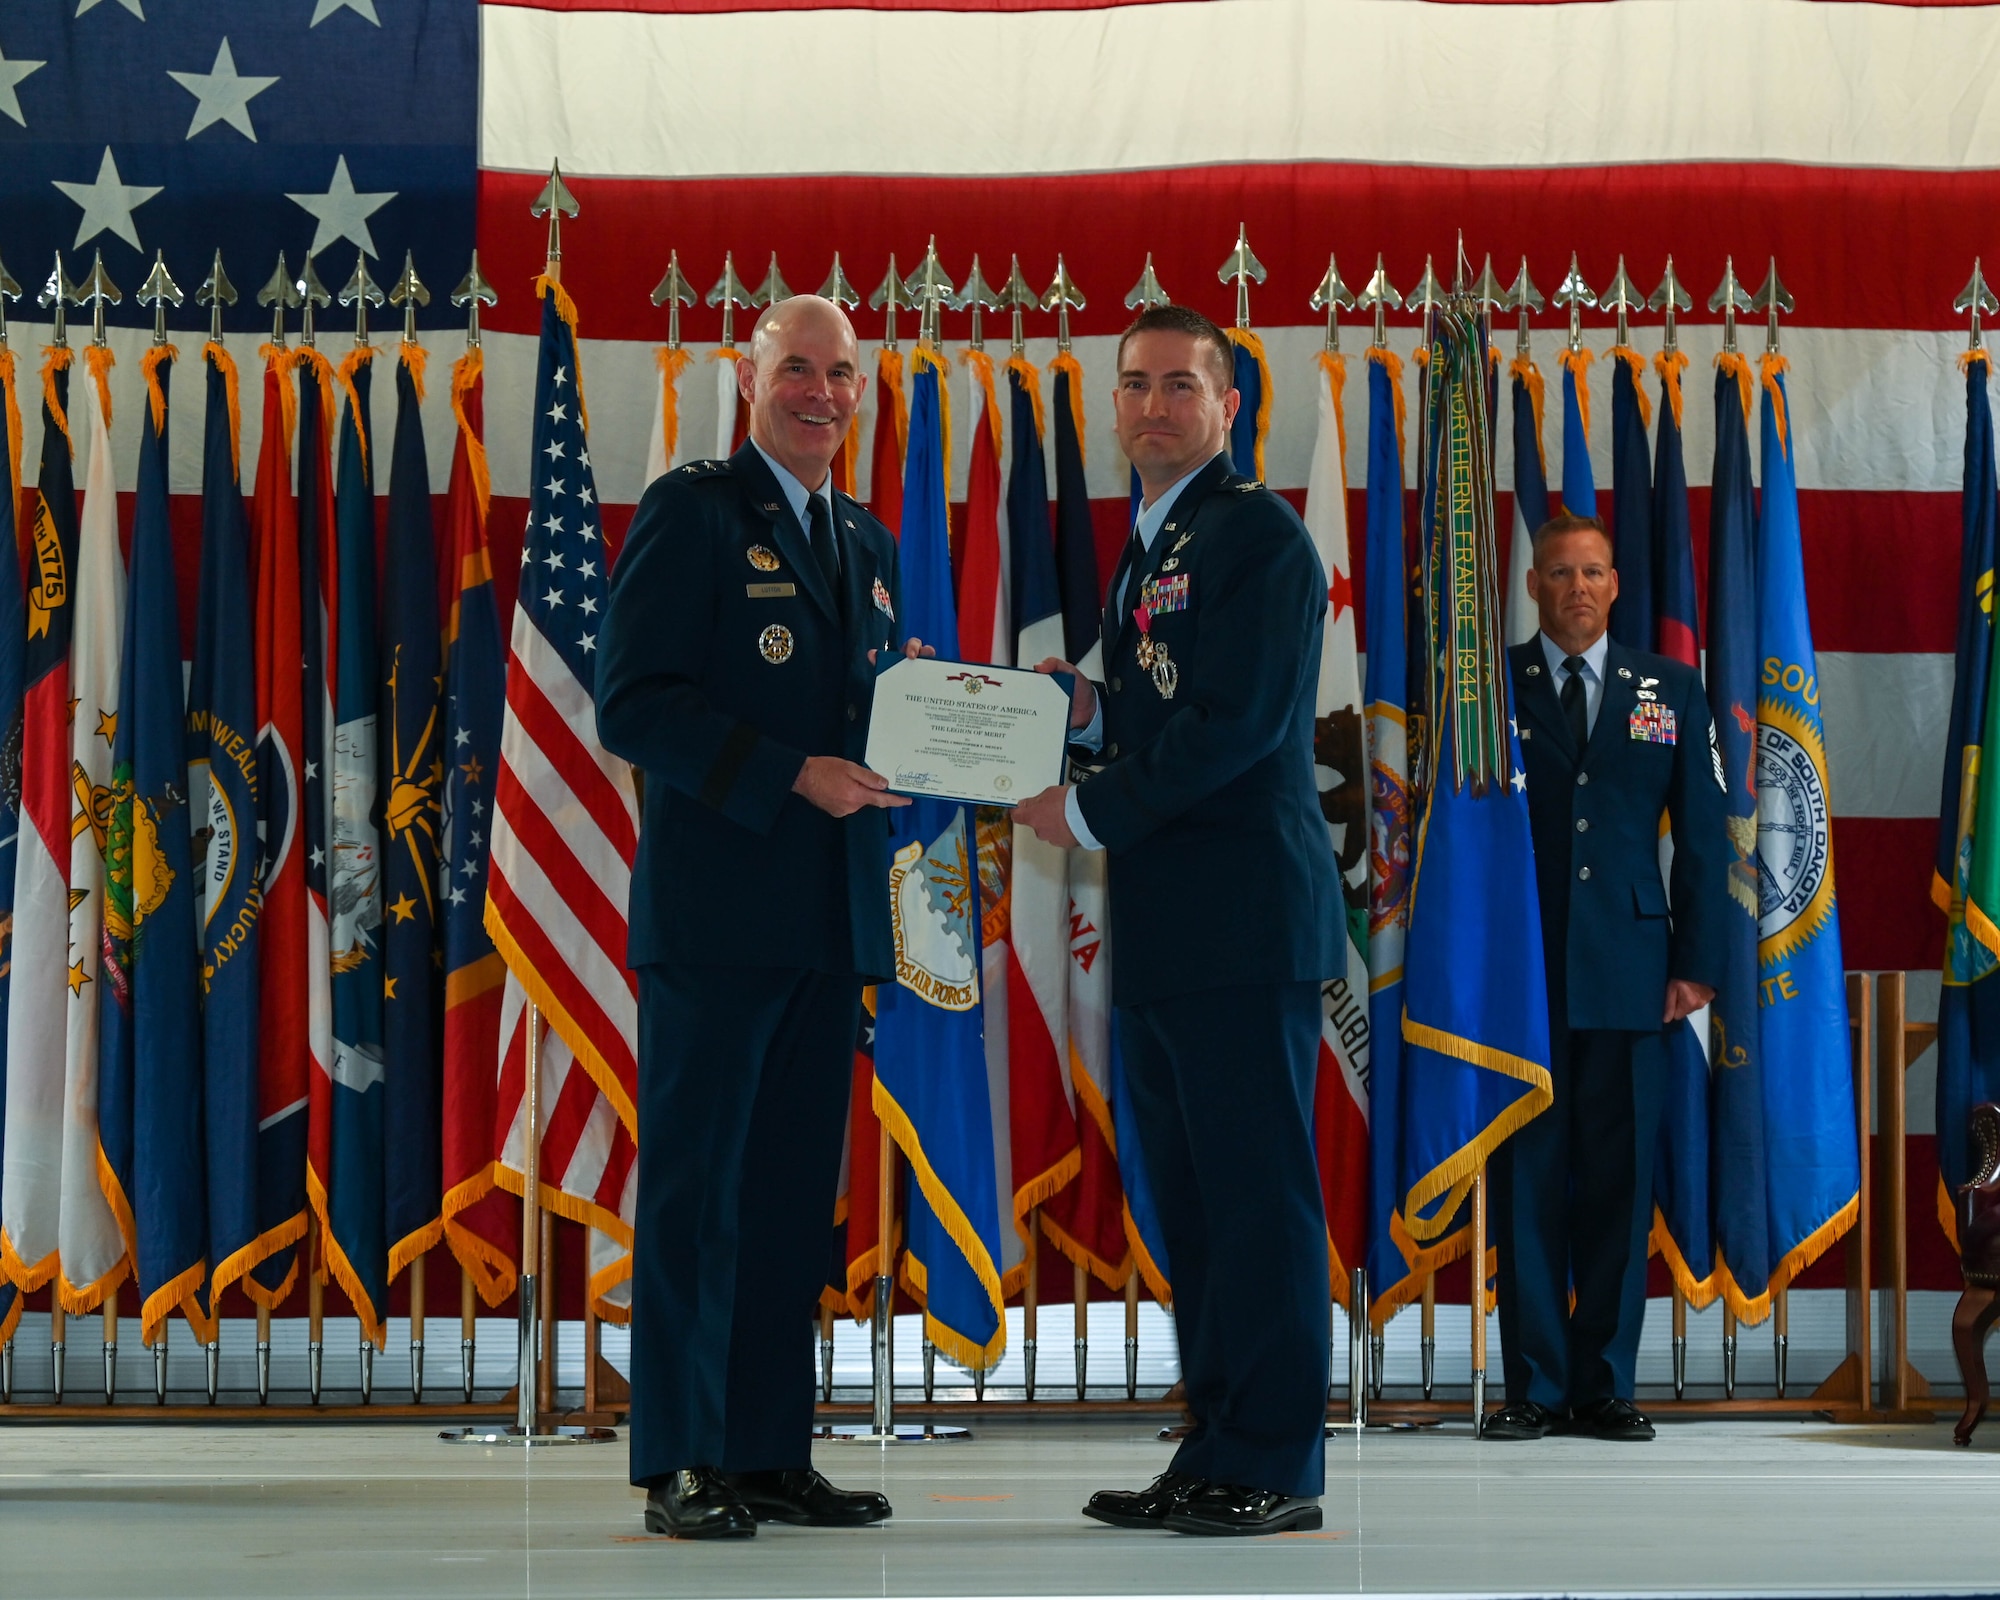 Maj. Gen. Michael Lutton, 20th Air Force commander, awards The Legion of Merit to Col. Christopher Menuey, former 91st Missile Wing commander, at Minot Air Force Base, North Dakota, June 06, 2022. The Legion of Merit is awarded tho those who have distinguished themselves by exceptionally meritorious conduct in the performance of outstanding services. (U.S. Air Force photo by Airman 1st Class Evan Lichtenhan)